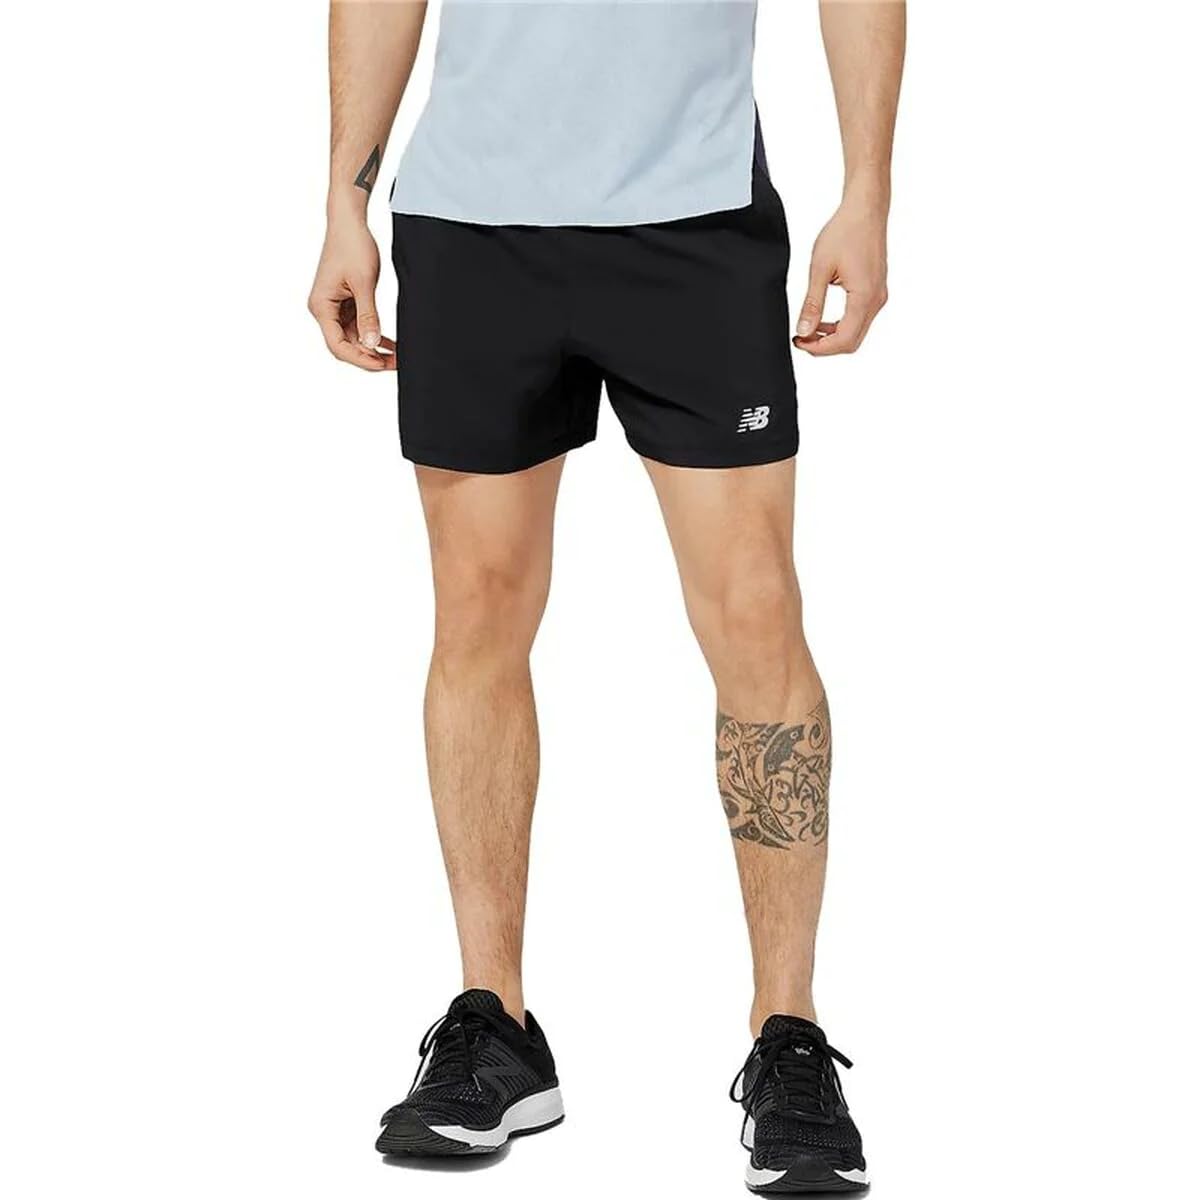 New Balance Men's 5" Accelerate Short (Black) $13.19 & More + Free Shipping w/ Prime or on $35+